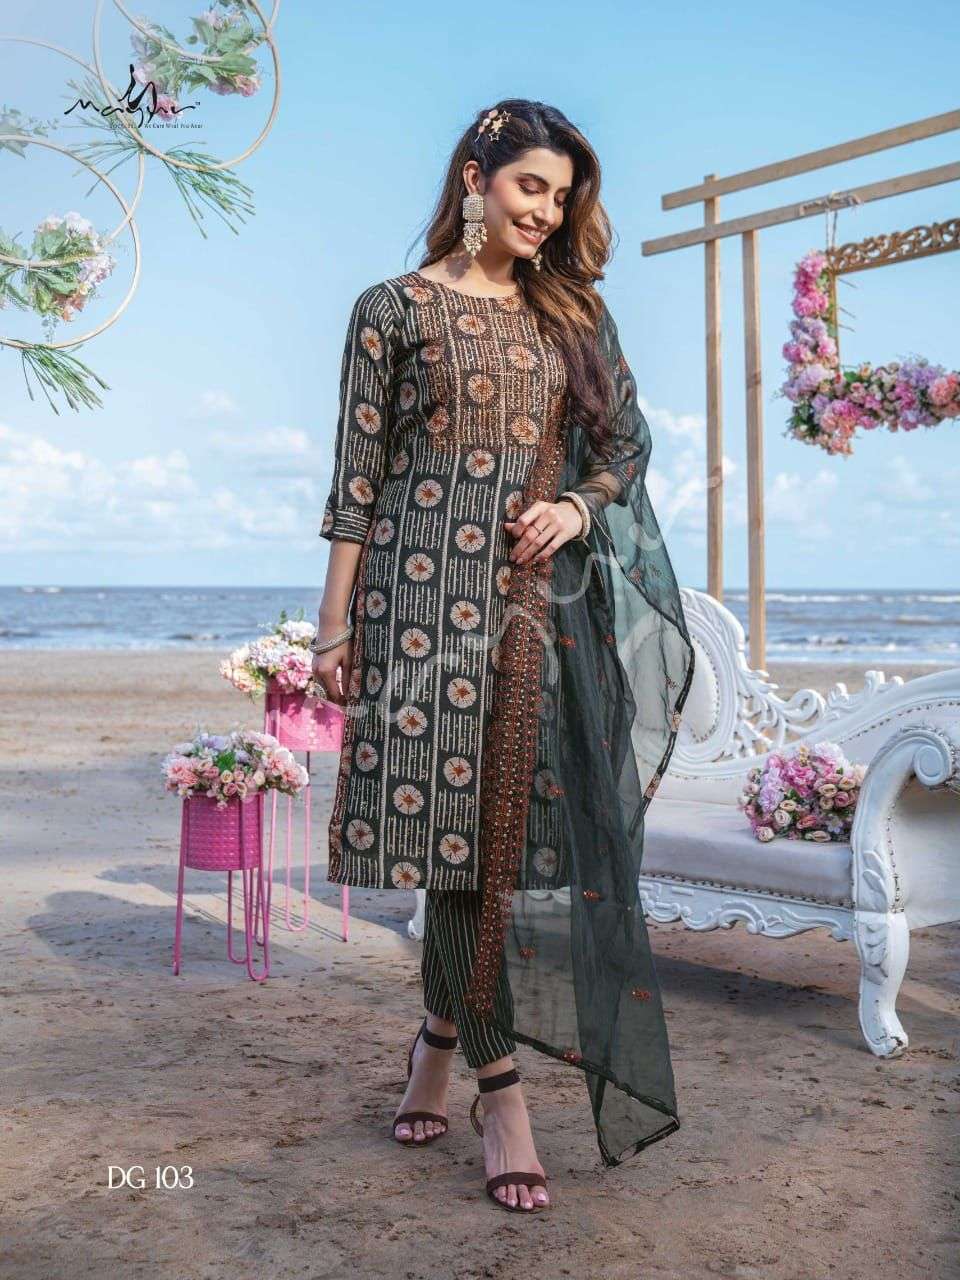 DREAM GIRL BY MAYUR 101 TO 106 SERIES BEAUTIFUL SUITS COLORFUL STYLISH FANCY CASUAL WEAR & ETHNIC WEAR MODAL PRINT DRESSES AT WHOLESALE PRICE